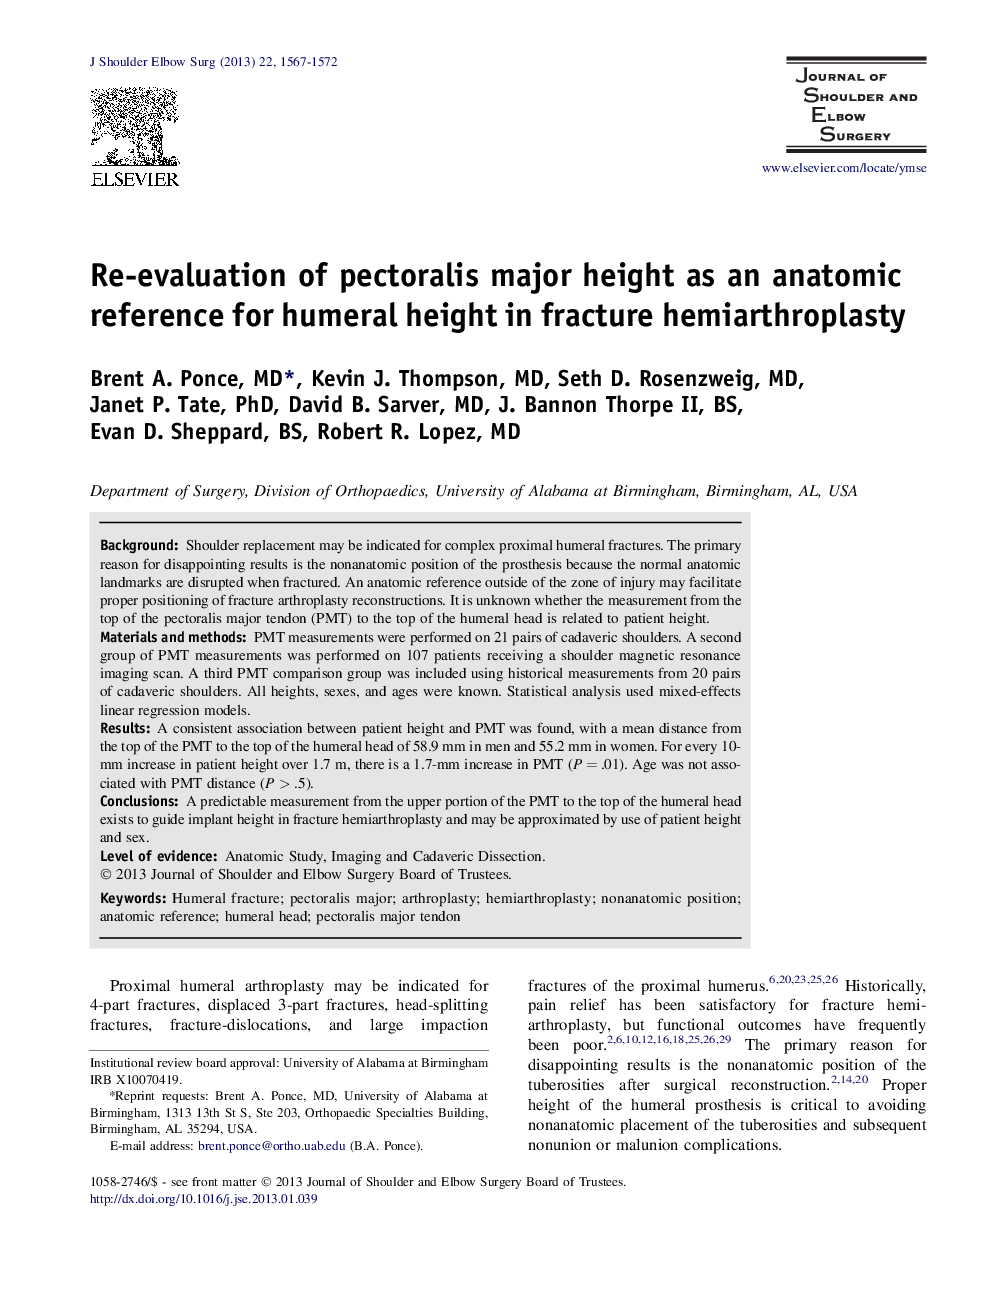 Re-evaluation of pectoralis major height as an anatomic reference for humeral height in fracture hemiarthroplasty 